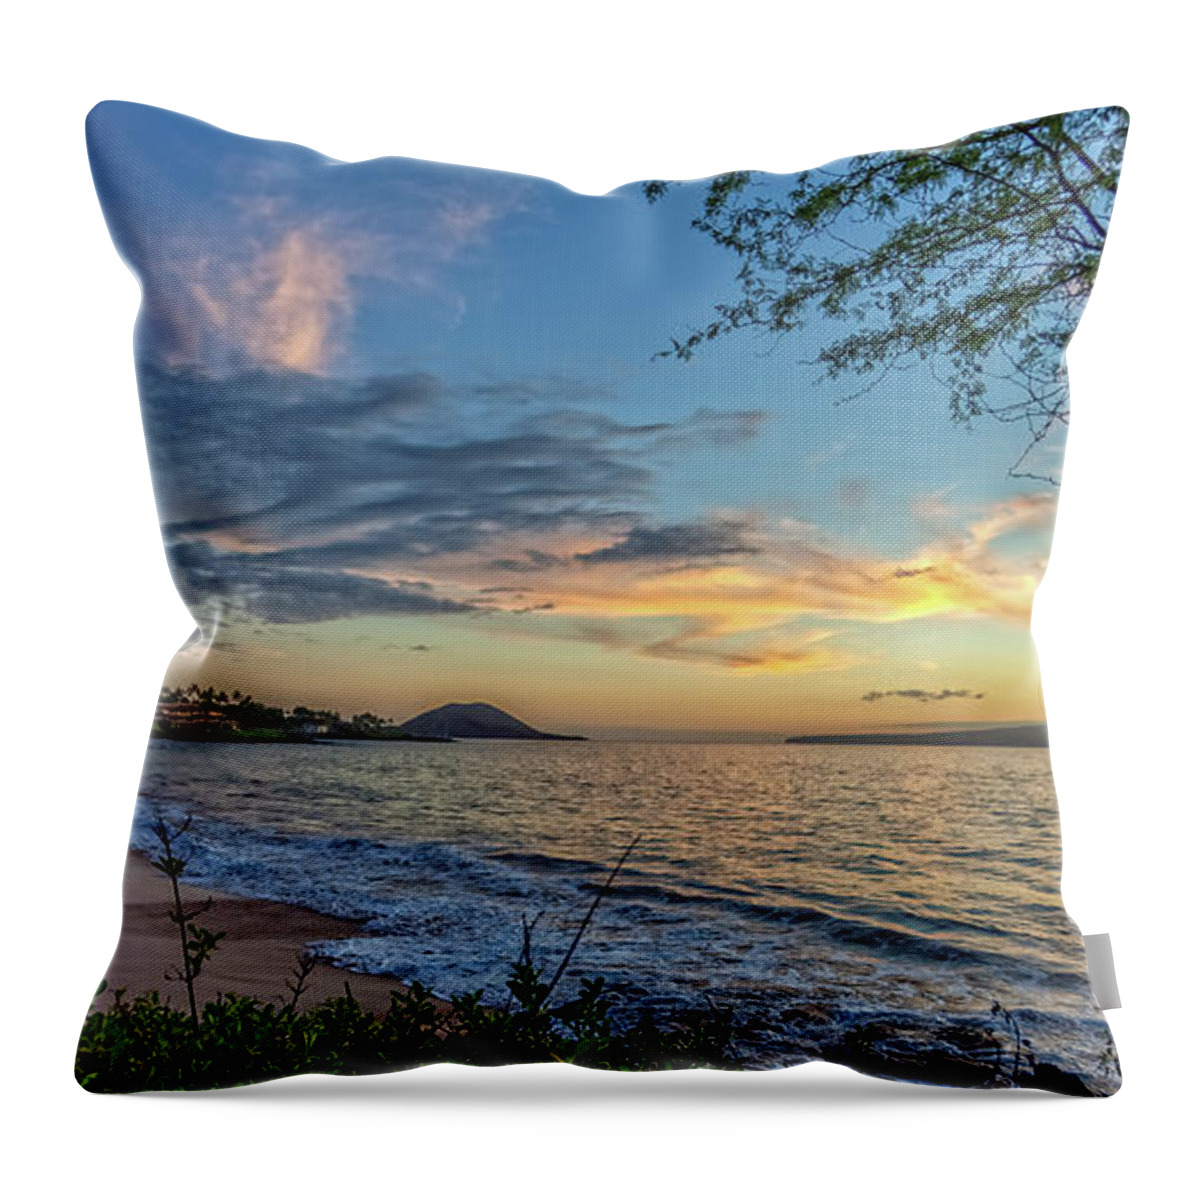 Makena View Throw Pillow featuring the photograph Makena View by Chris Spencer